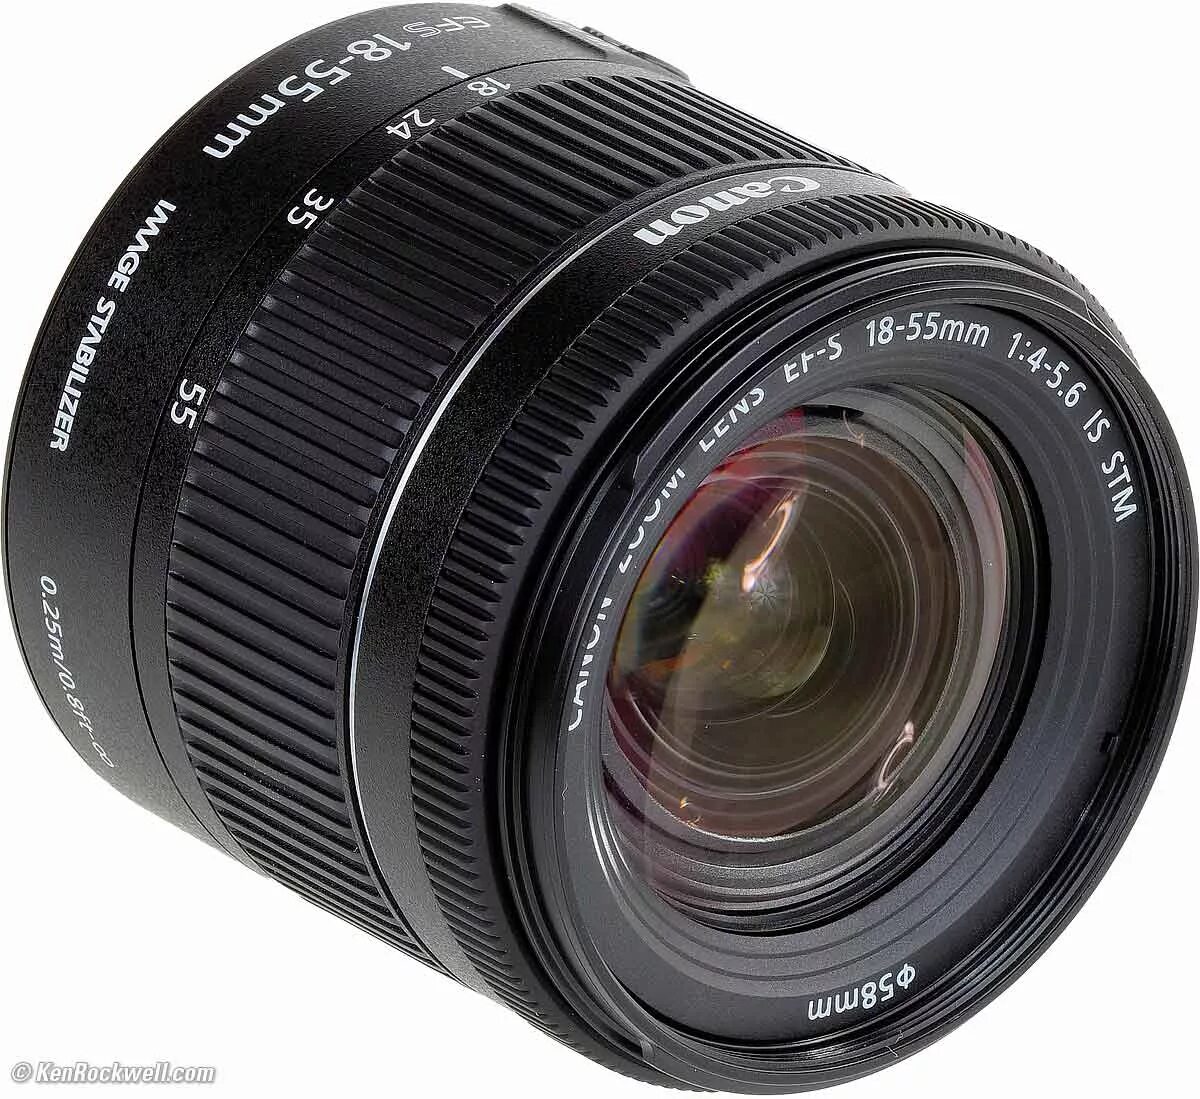 Canon 18 55 STM. Canon EF-S 18-55mm f/3.5-5.6. EF-S 18-55mm f/3.5-5.6 is STM. Canon 18-55 is STM.